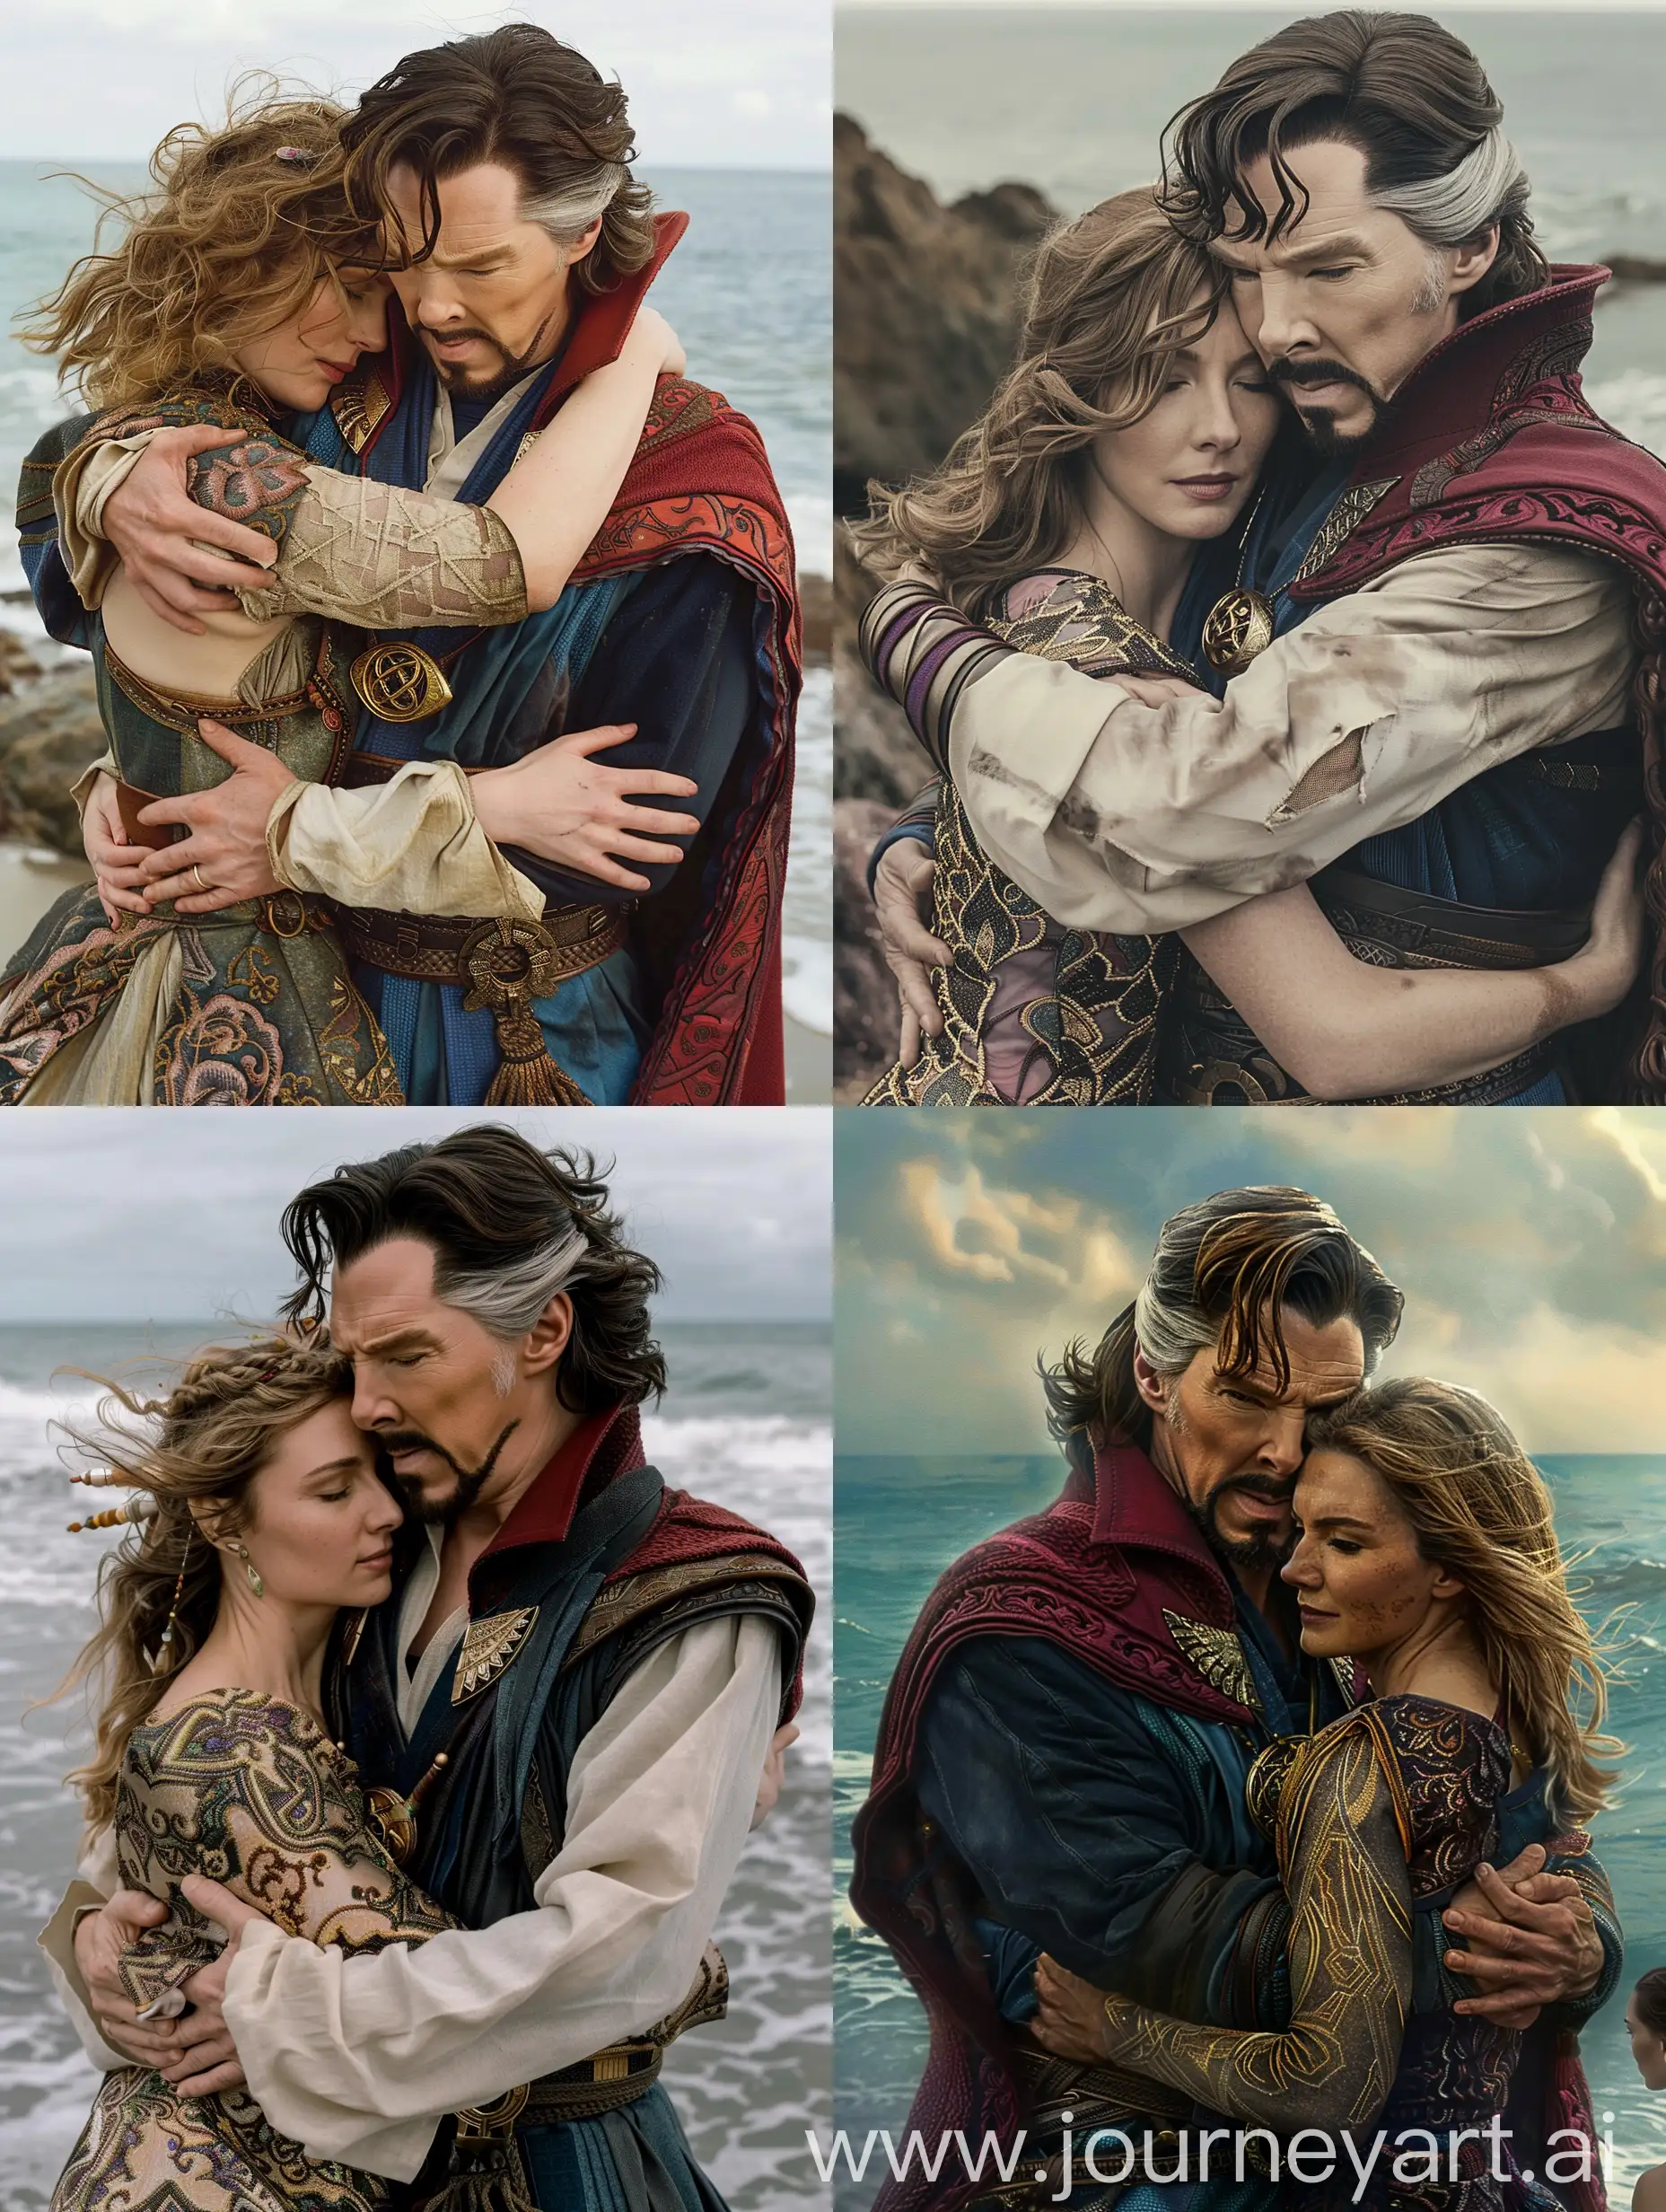 Doctor Strange, shoulder length hair,  pirate shirt open, exposing chest, brocade vest, hugging a woman near the sea